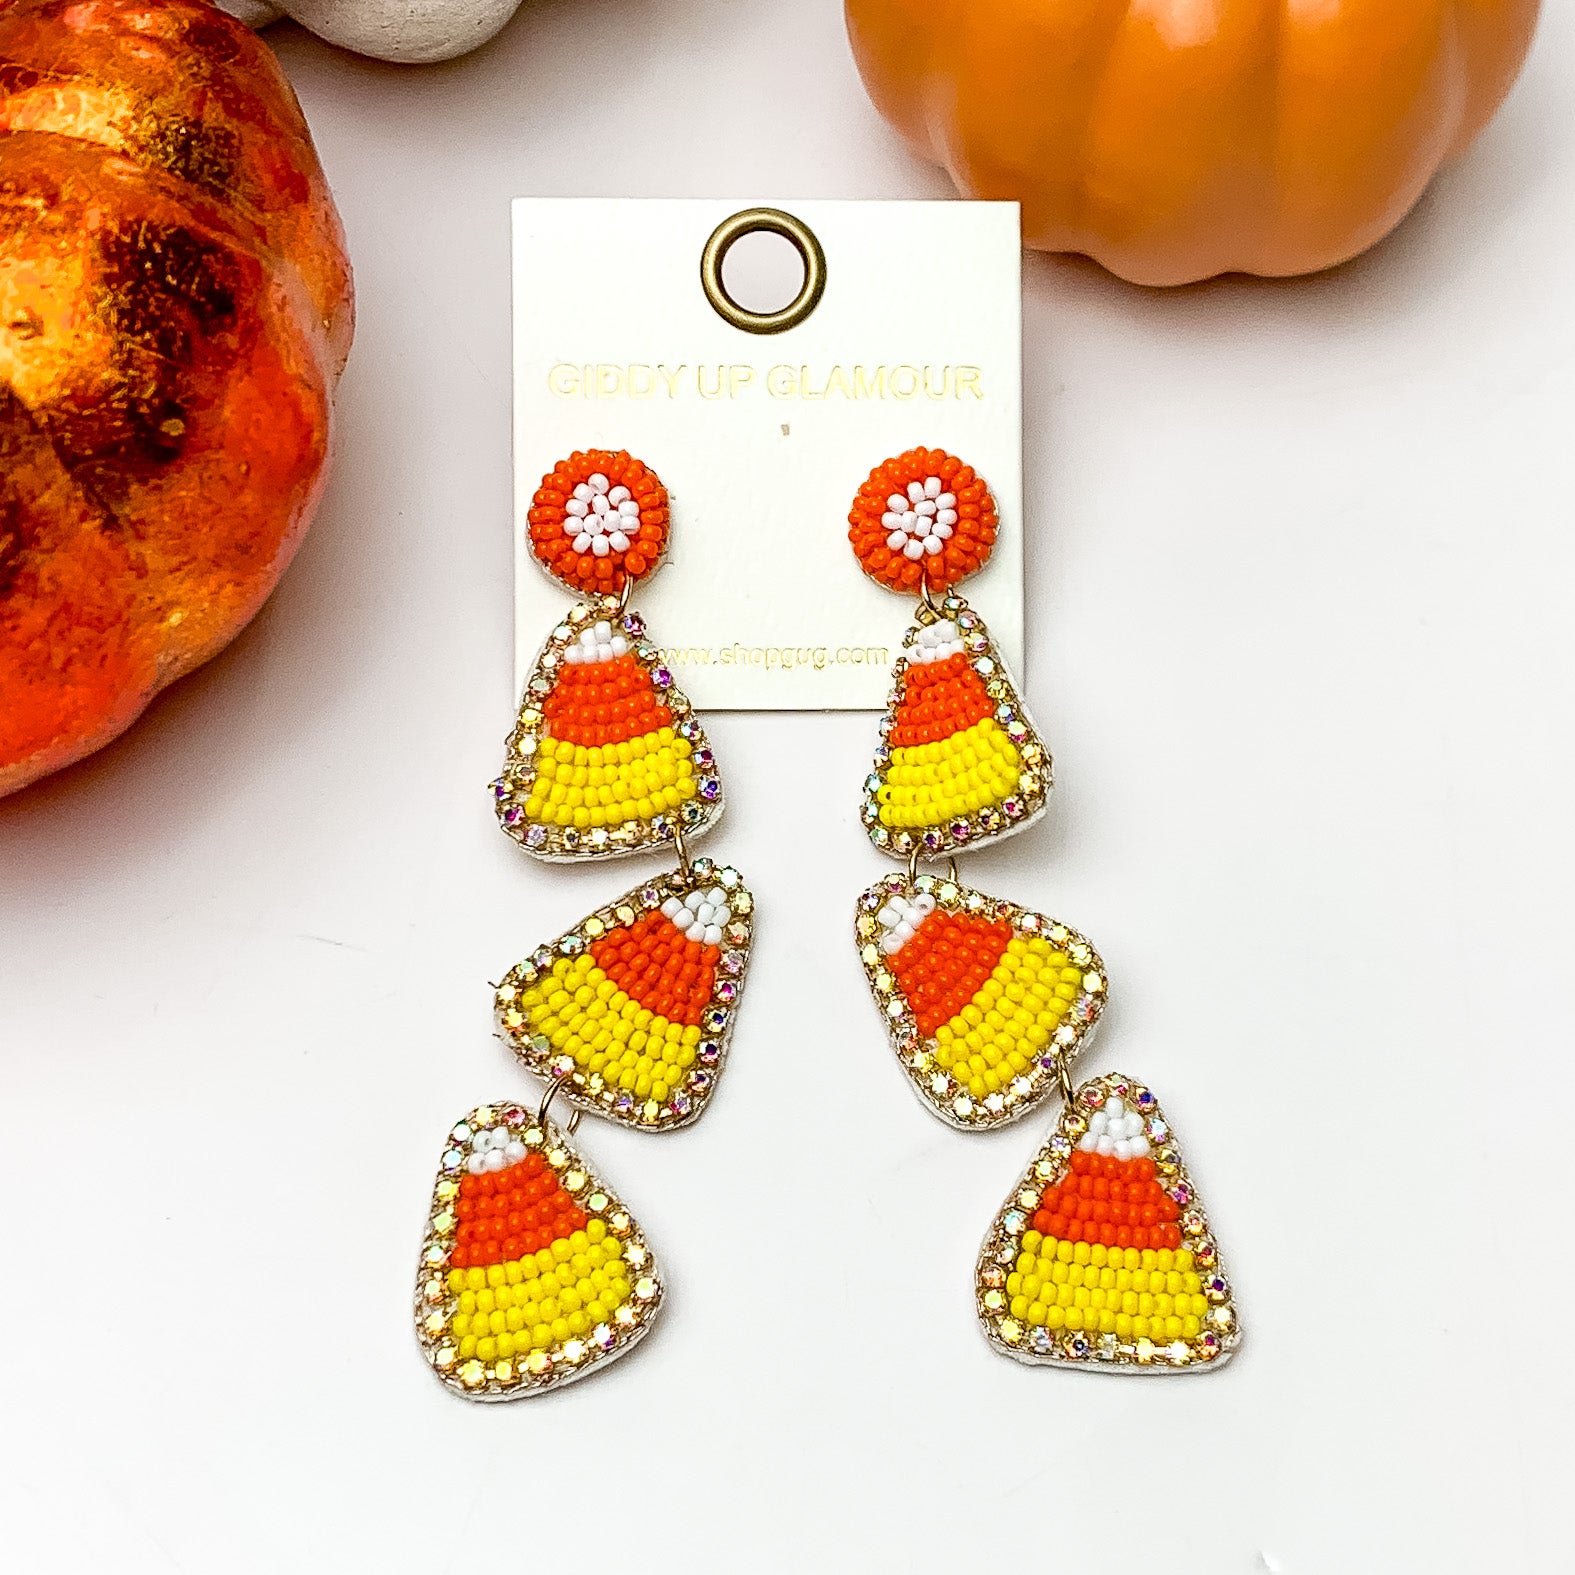 Beaded Candy Corn Drop Earrings with AB Crystal Outline in Orange and Yellow - Giddy Up Glamour Boutique